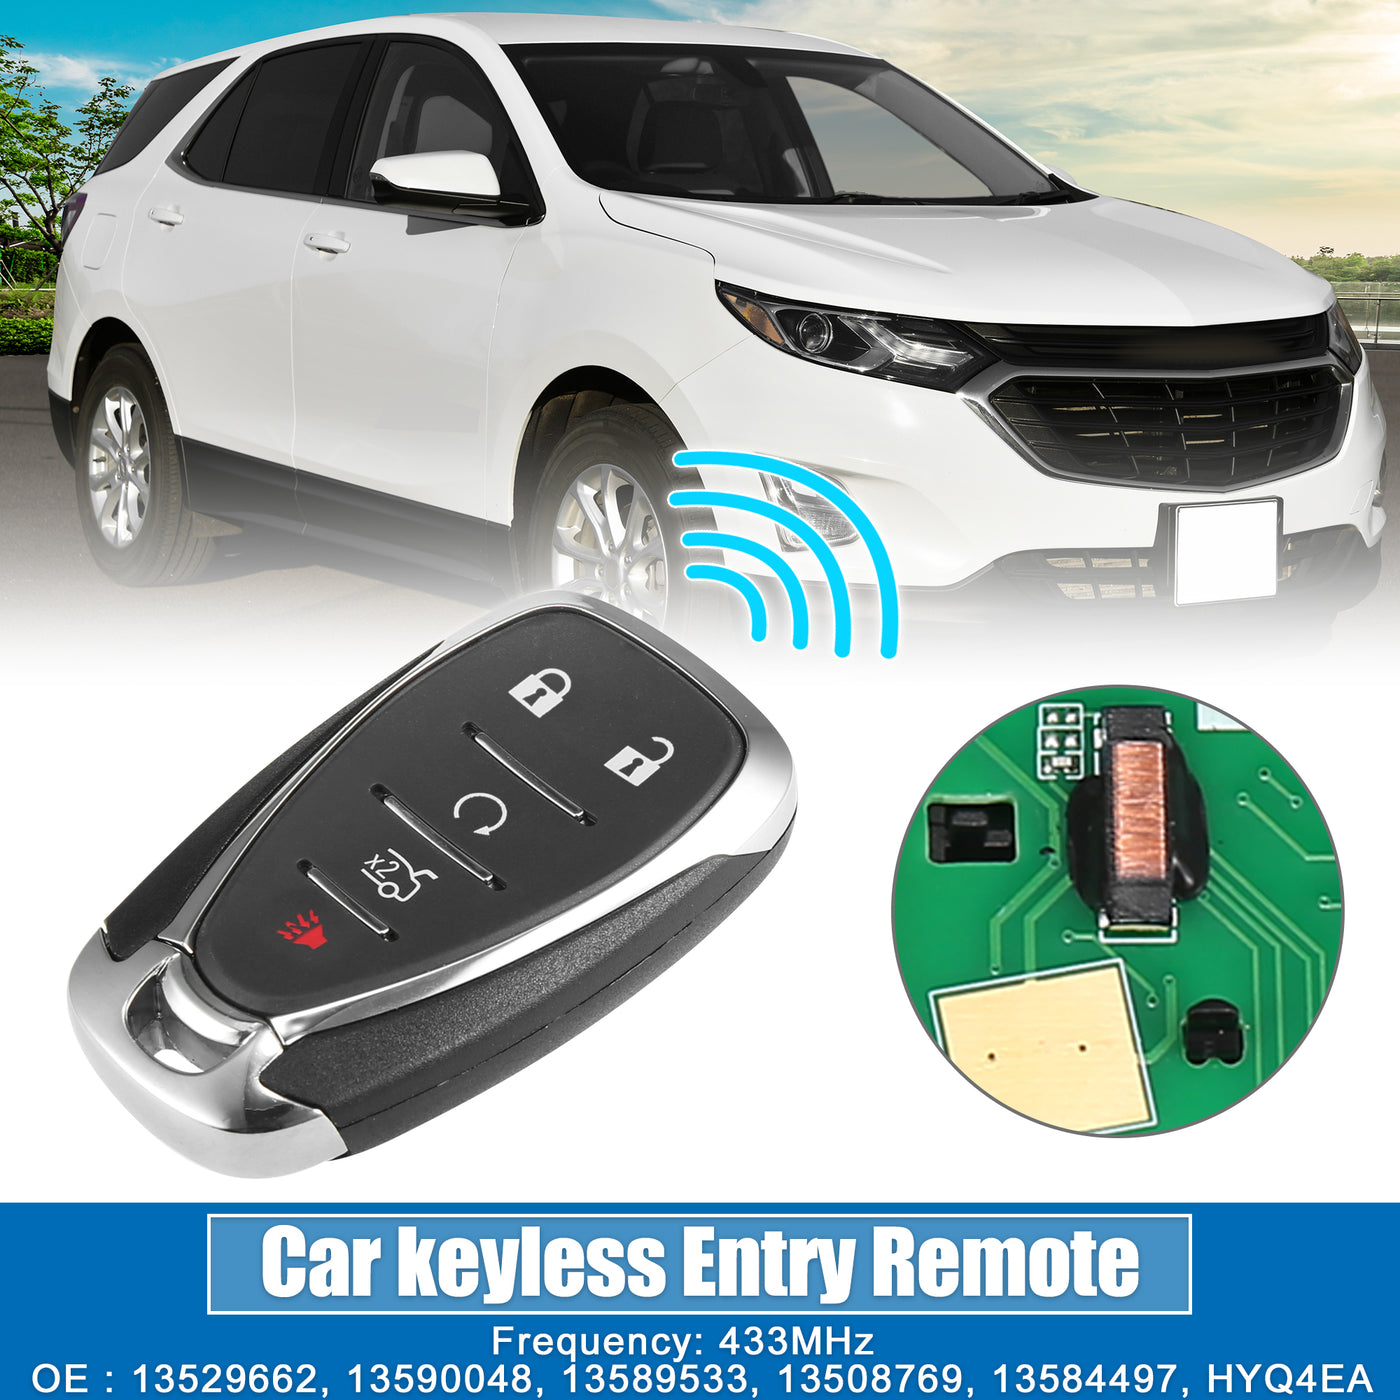 X AUTOHAUX 5 Button Car Keyless Entry Remote Control Replacement Key Fob Proximity Smart Fob HYQ4EA for Chevrolet Camaro 433MHz 46 Chip